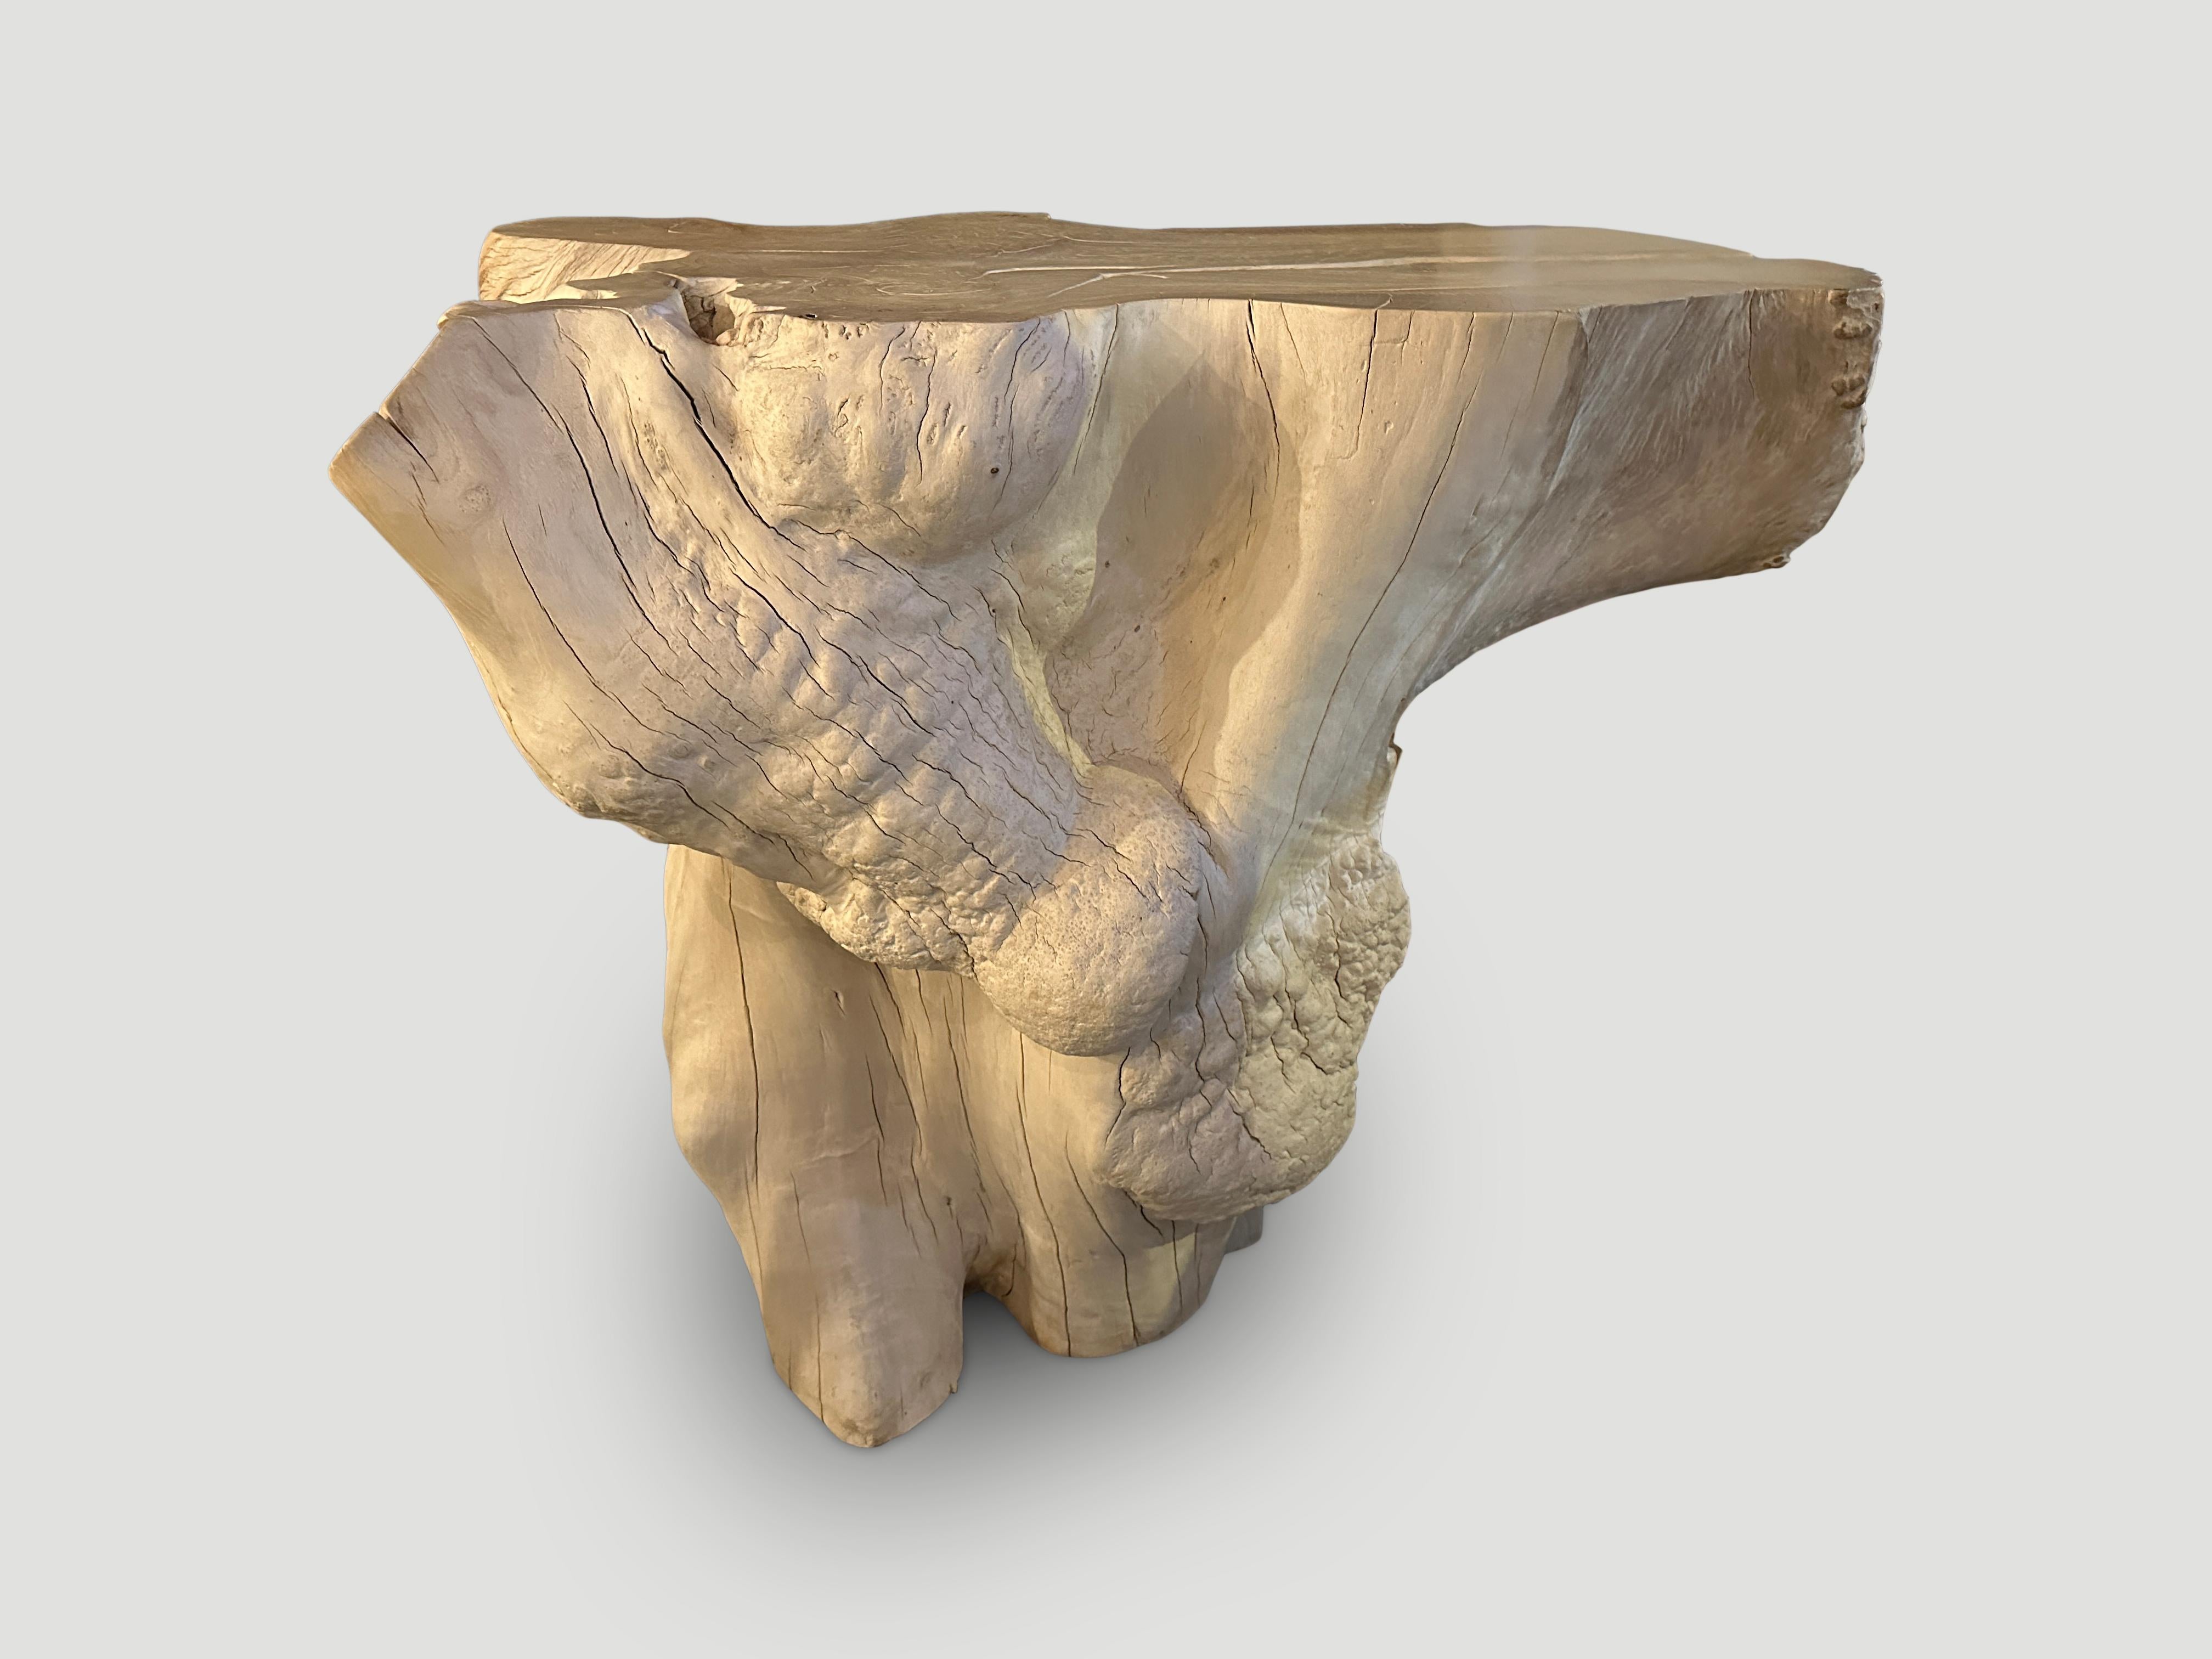 Impressive bleached teak wood console featuring the root of the tree with stunning natural markings that resemble clusters of pearls. This beautiful rare wood is the hardest to source. Sculptural and usable one of a kind piece. 

The St. Barts